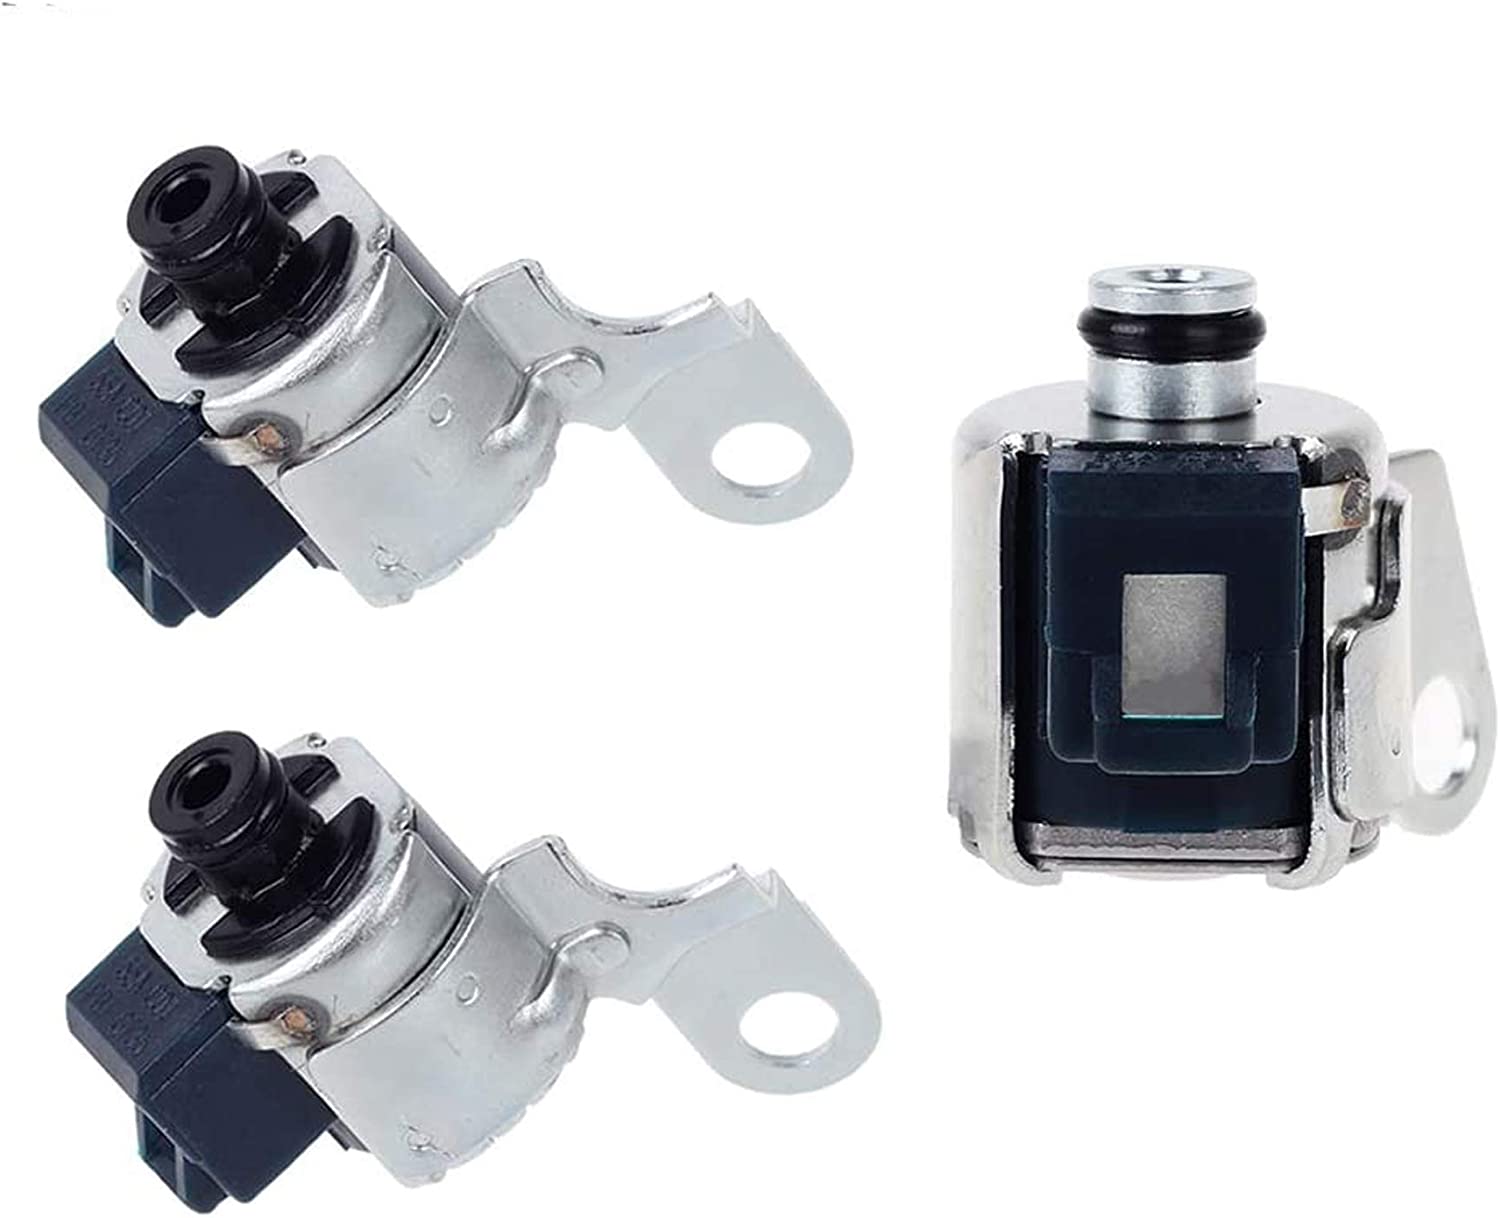 HERCOO A340 AW4 Transmission TCC Lock Up Solenoid + Shift Solenoids Kit Fits for 1986 UP Jeep Cherokee/Comanche/Wagoneer,Toyota 4Runner/Cressida/Pickup/Previa/Supra/T100/Tacoma, 1992-1997 Lexus SC300